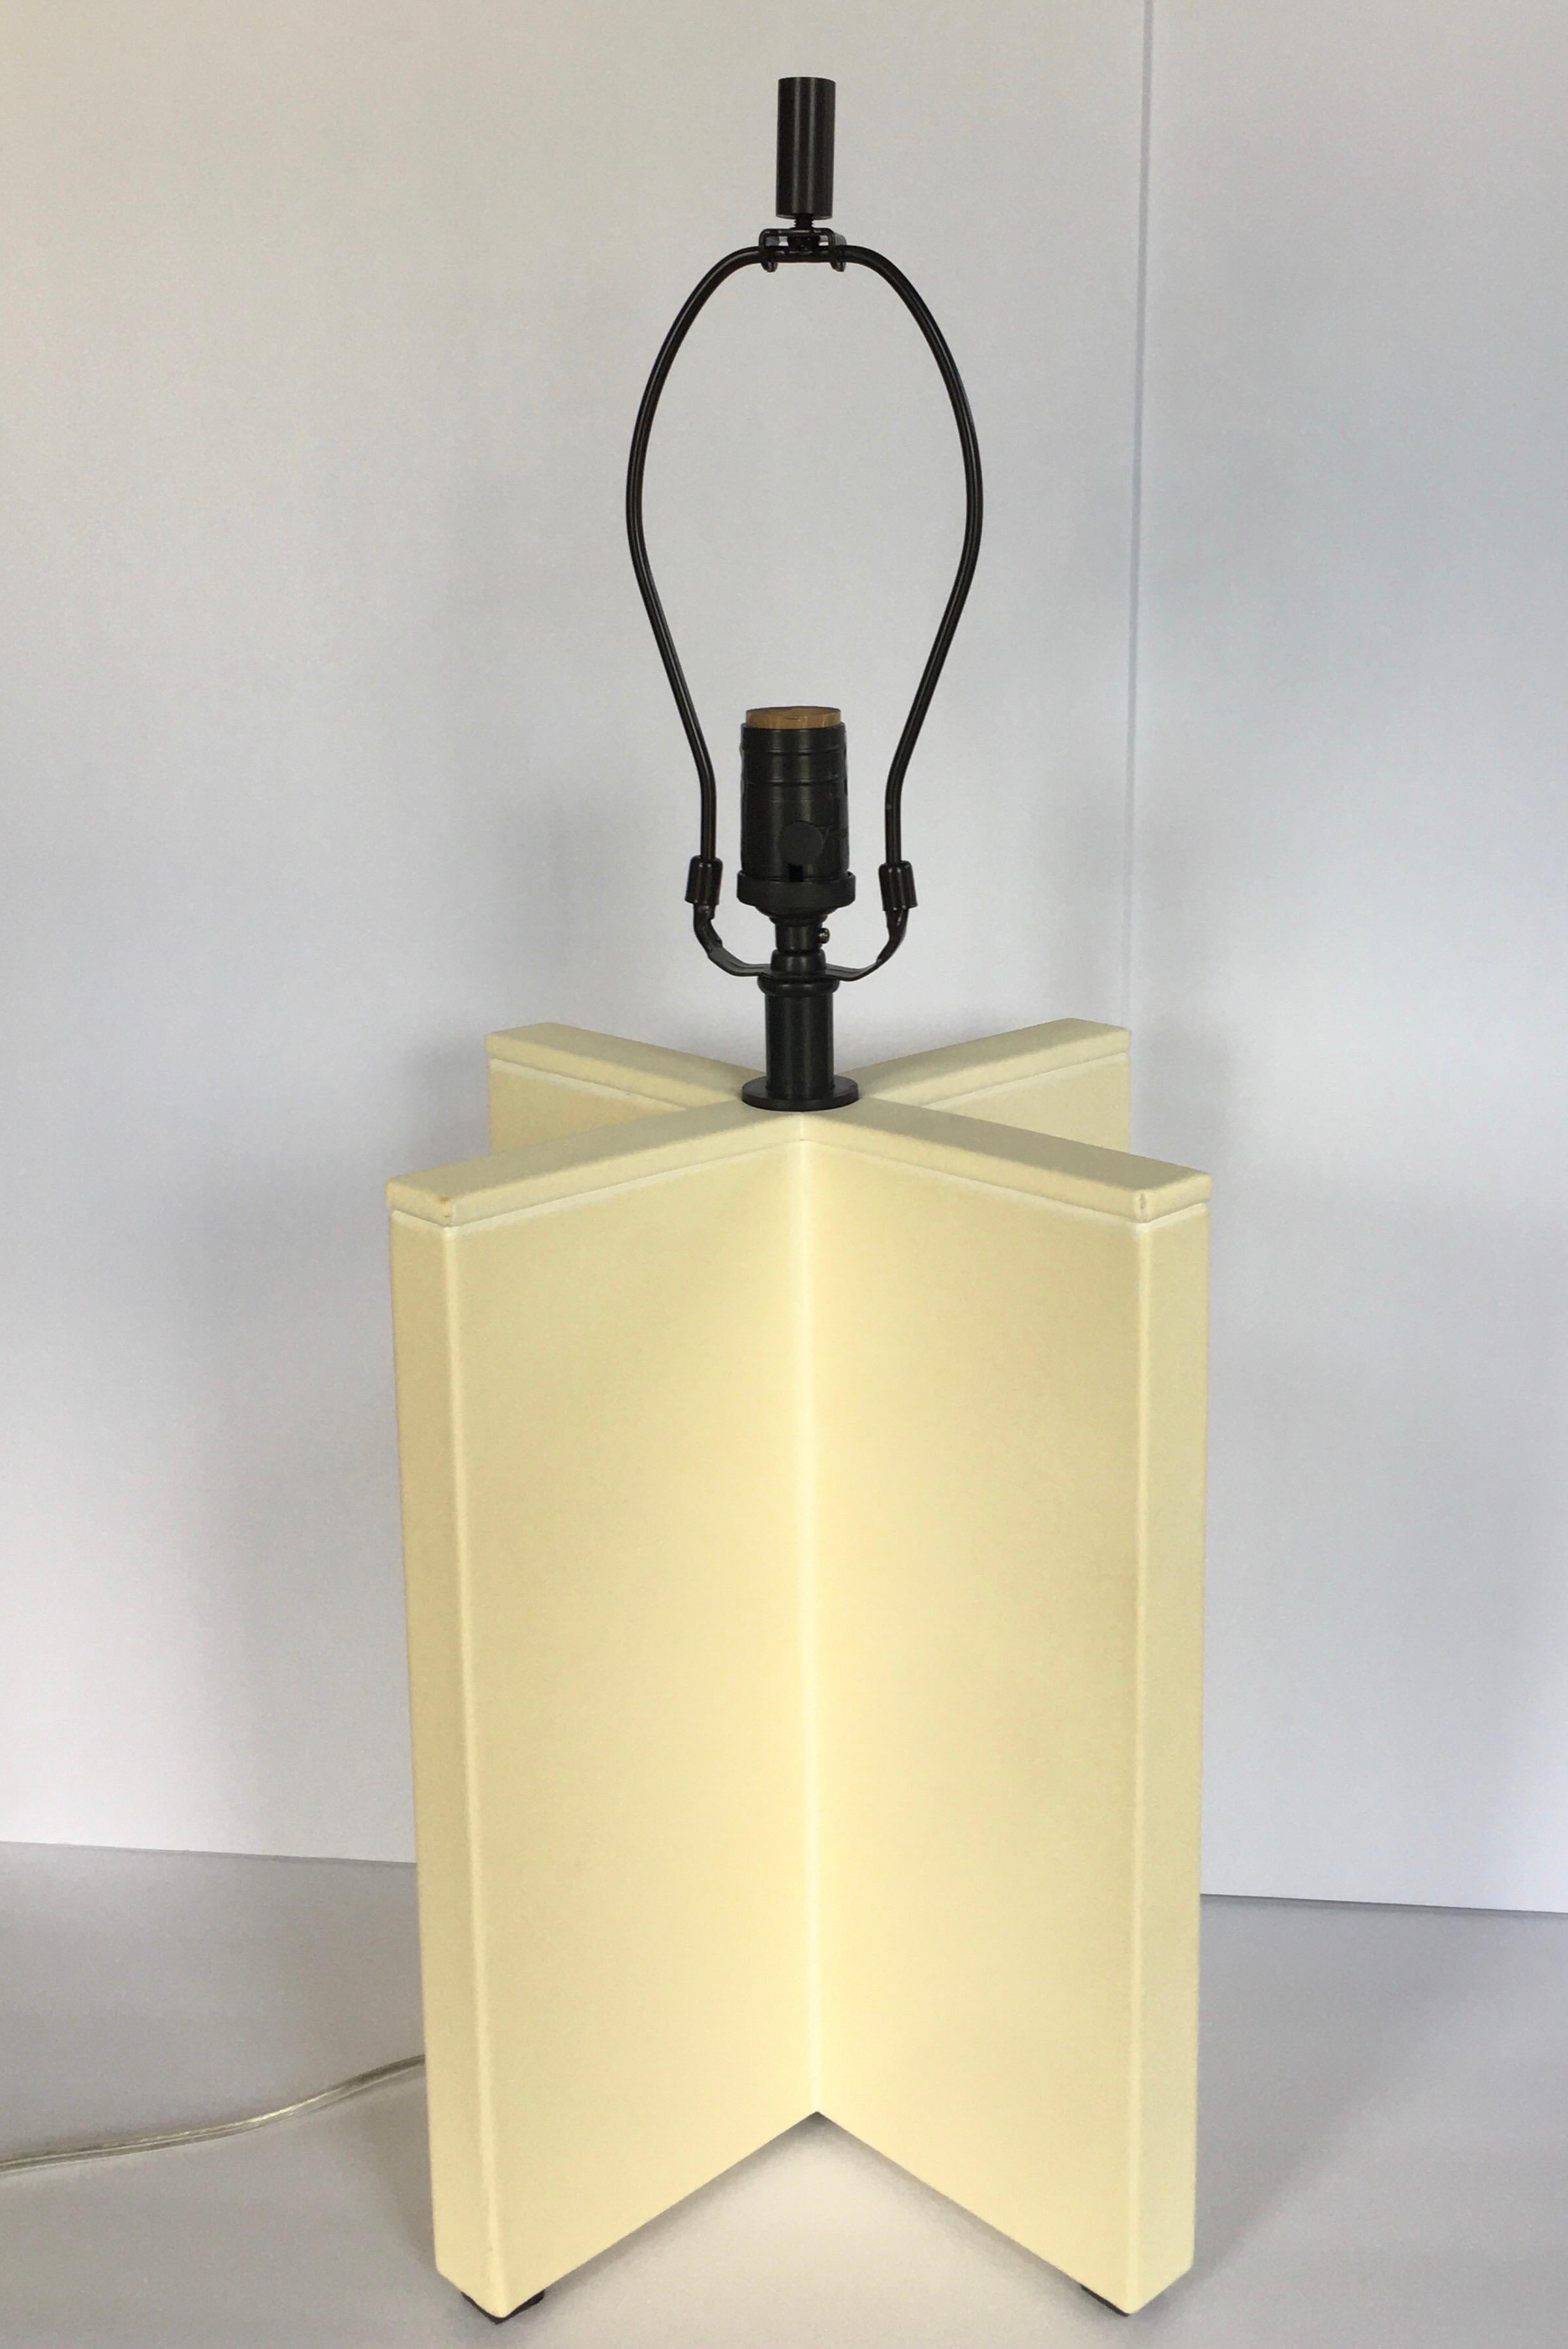 Modern crosspiece cream goatskin table lamp with bronze tone hardware by J. Randall Powers for Visual Comfort Lighting. Lamp shade not included.

Measures: Height to finial 26.5 inches.
Height to socket 19 inches.